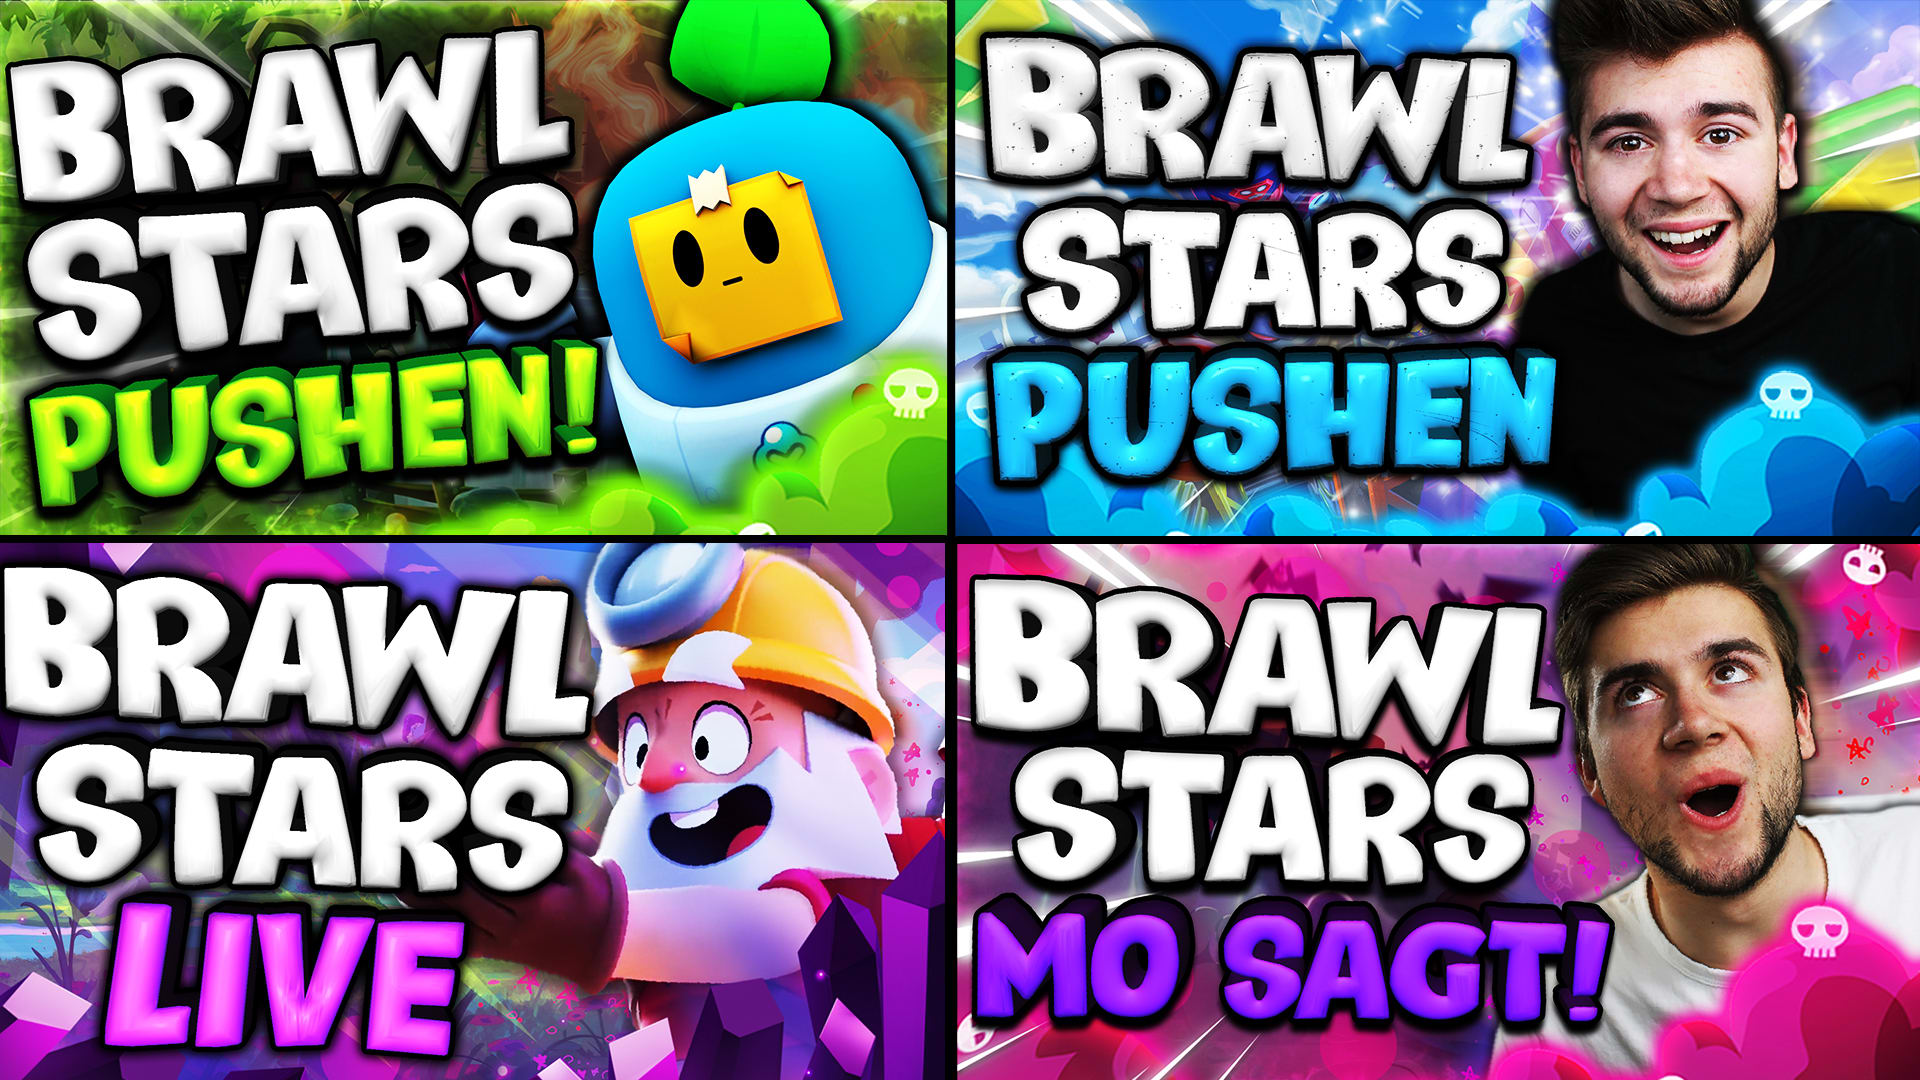 Do Epic Banners And Thumbnails Especially For Brawl Stars By Motastisch Fiverr - cool brawl stars banners